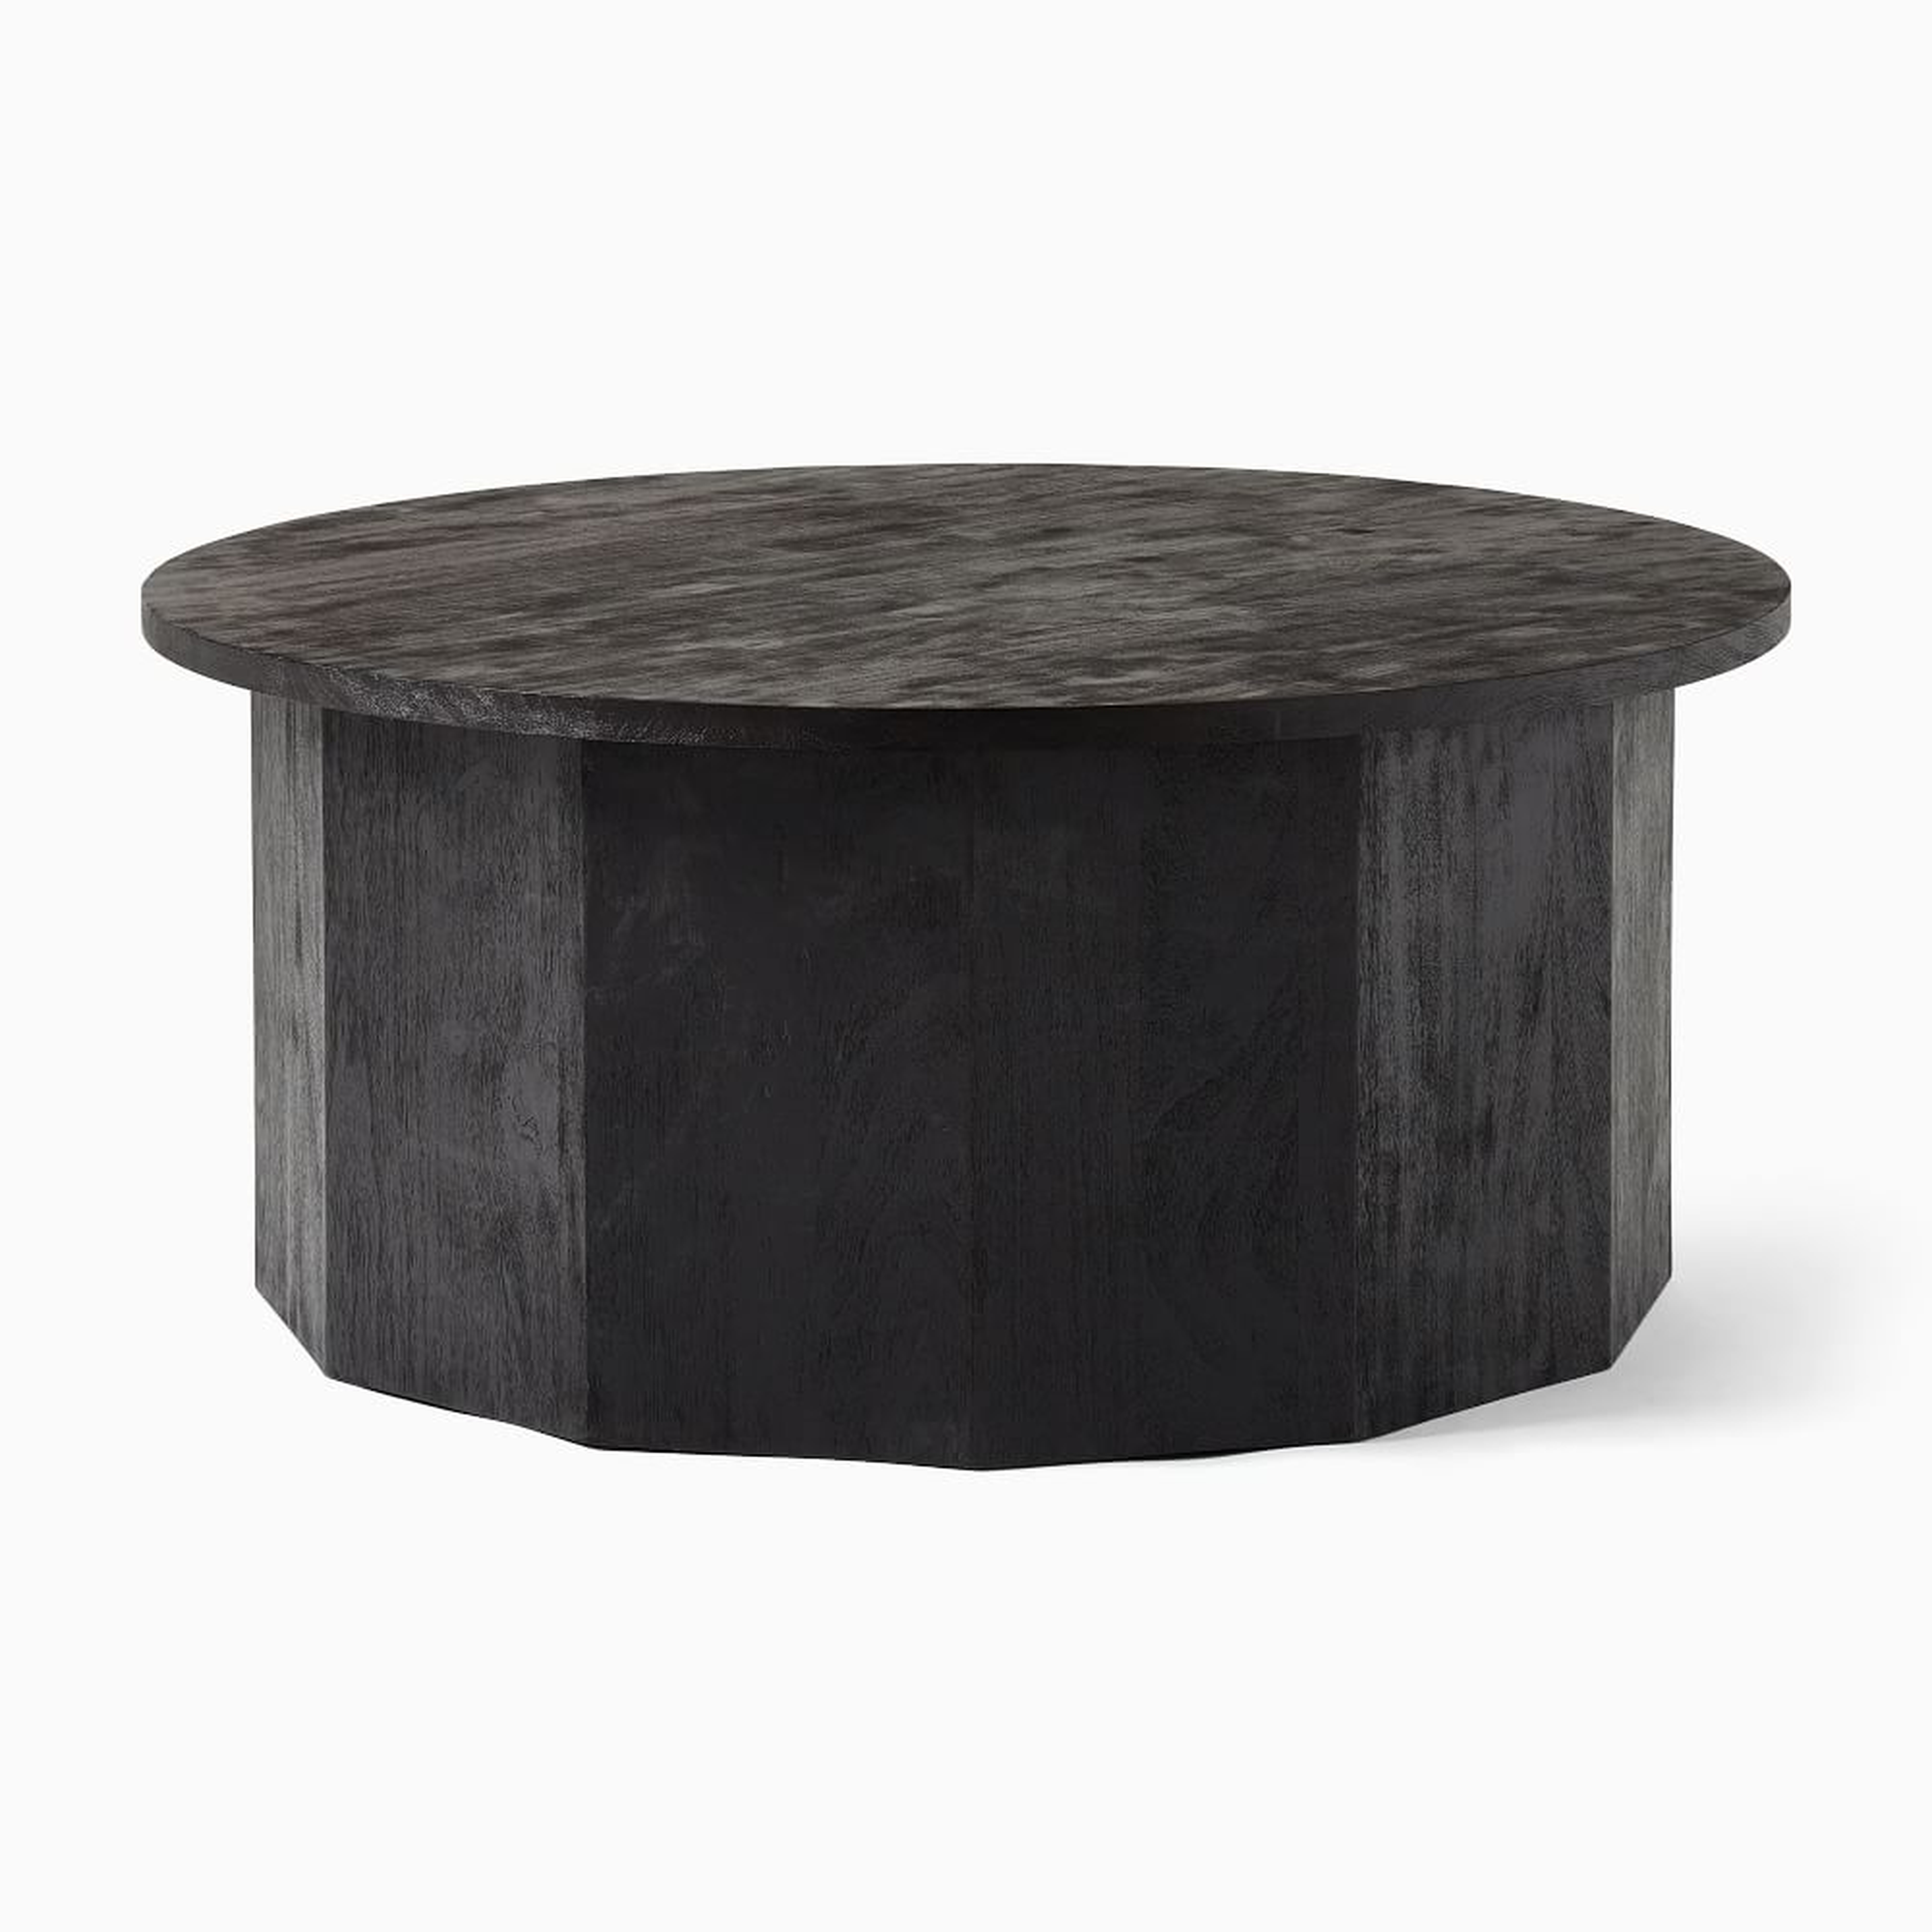 WE Exton Collection Faceted Coffee Table, Coffee Bean/Blackened Oak, Round 41" - West Elm